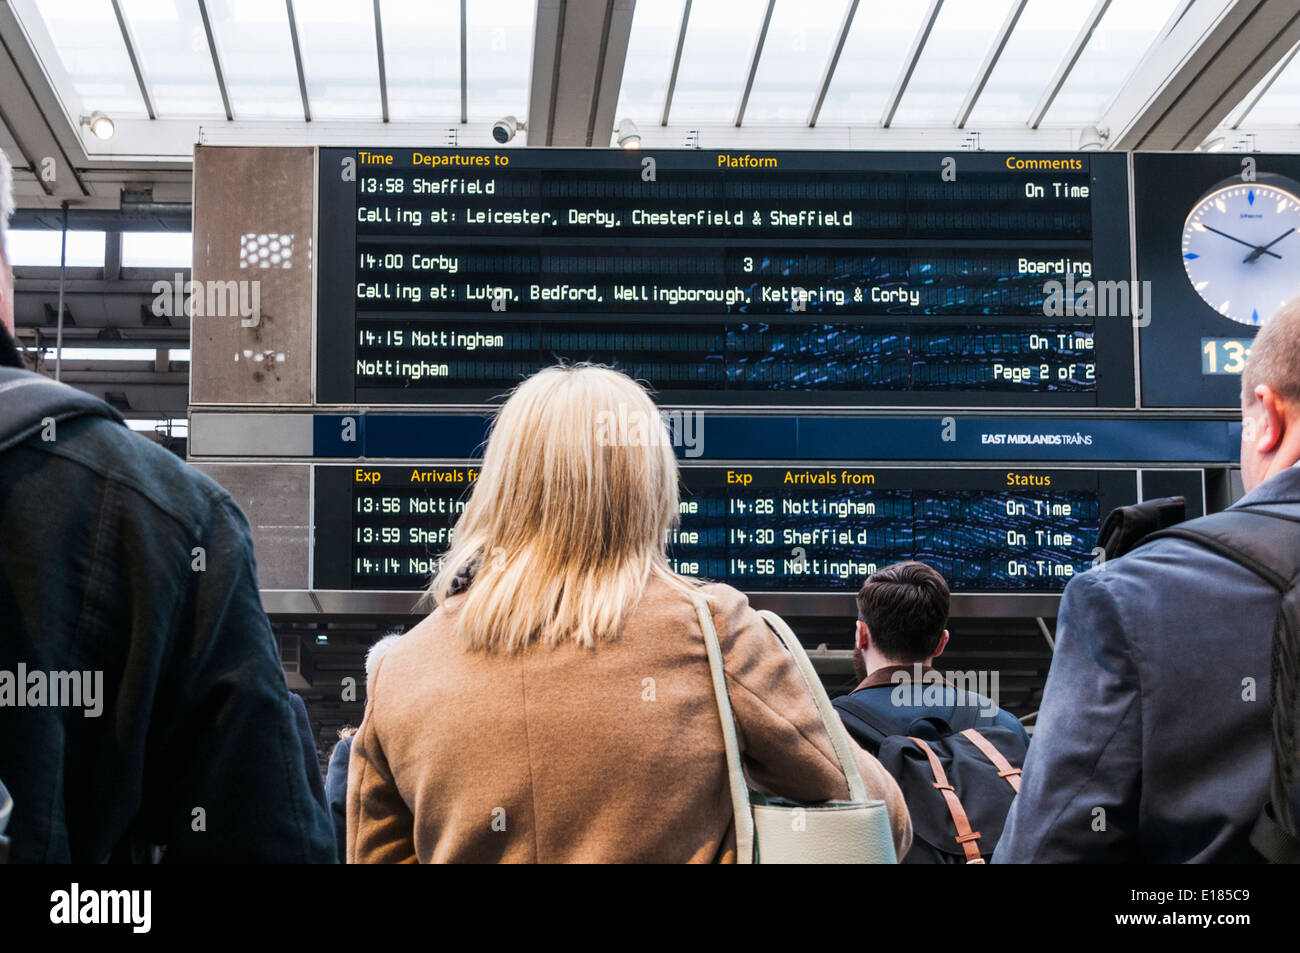 Backs of passengers standing looking up at the departures board at st Pancras train station in London Stock Photo